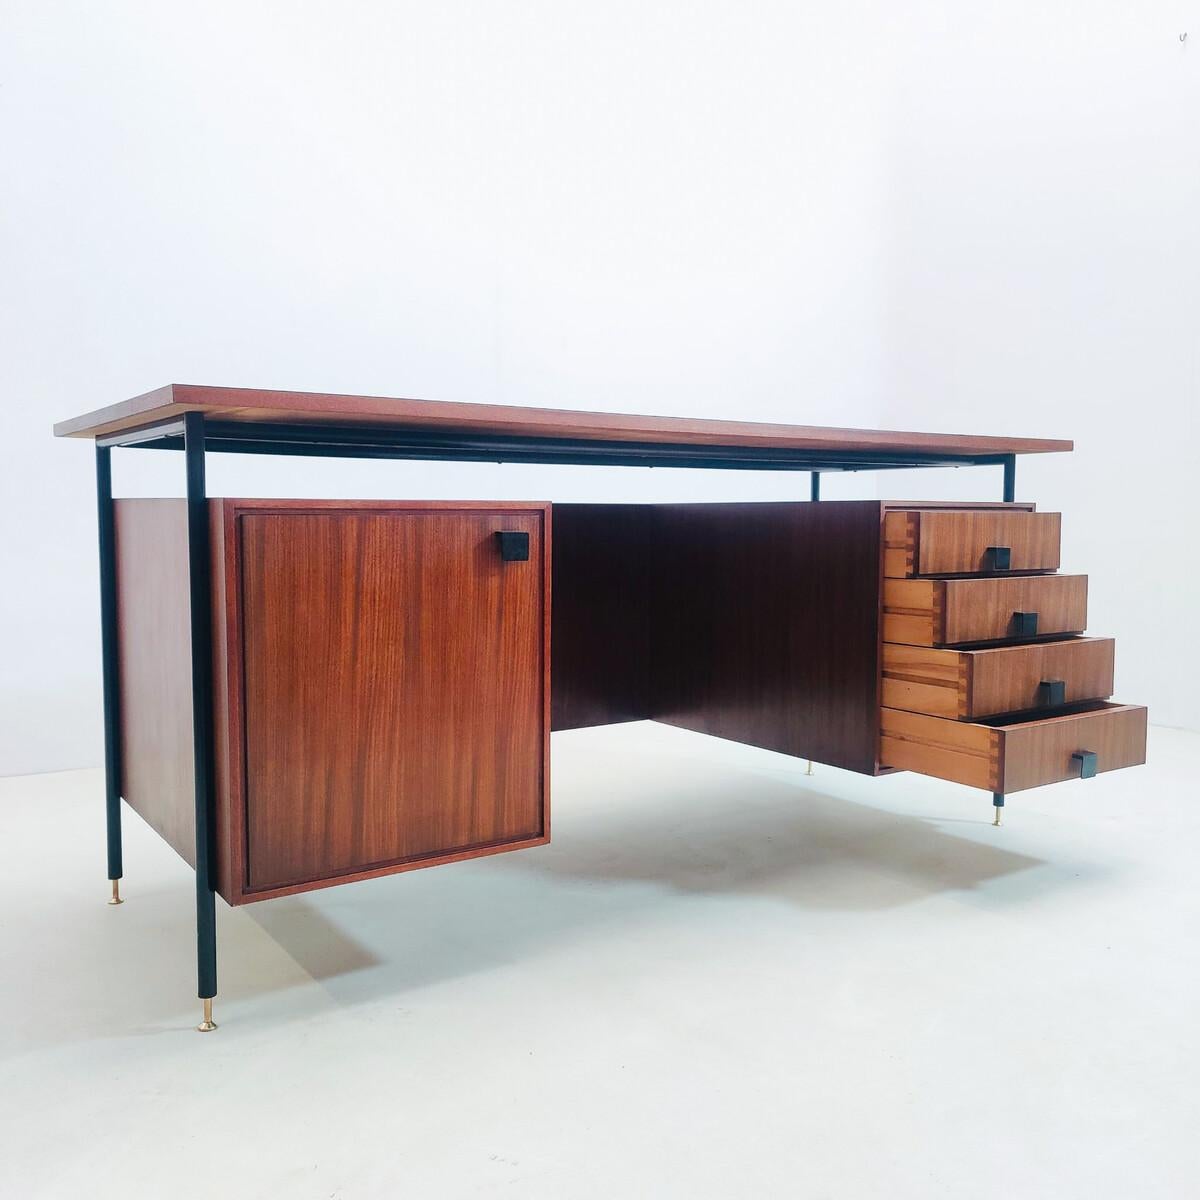 Mid-Century Modern Italian Desk with Drawers, Wood, 1960s For Sale 6